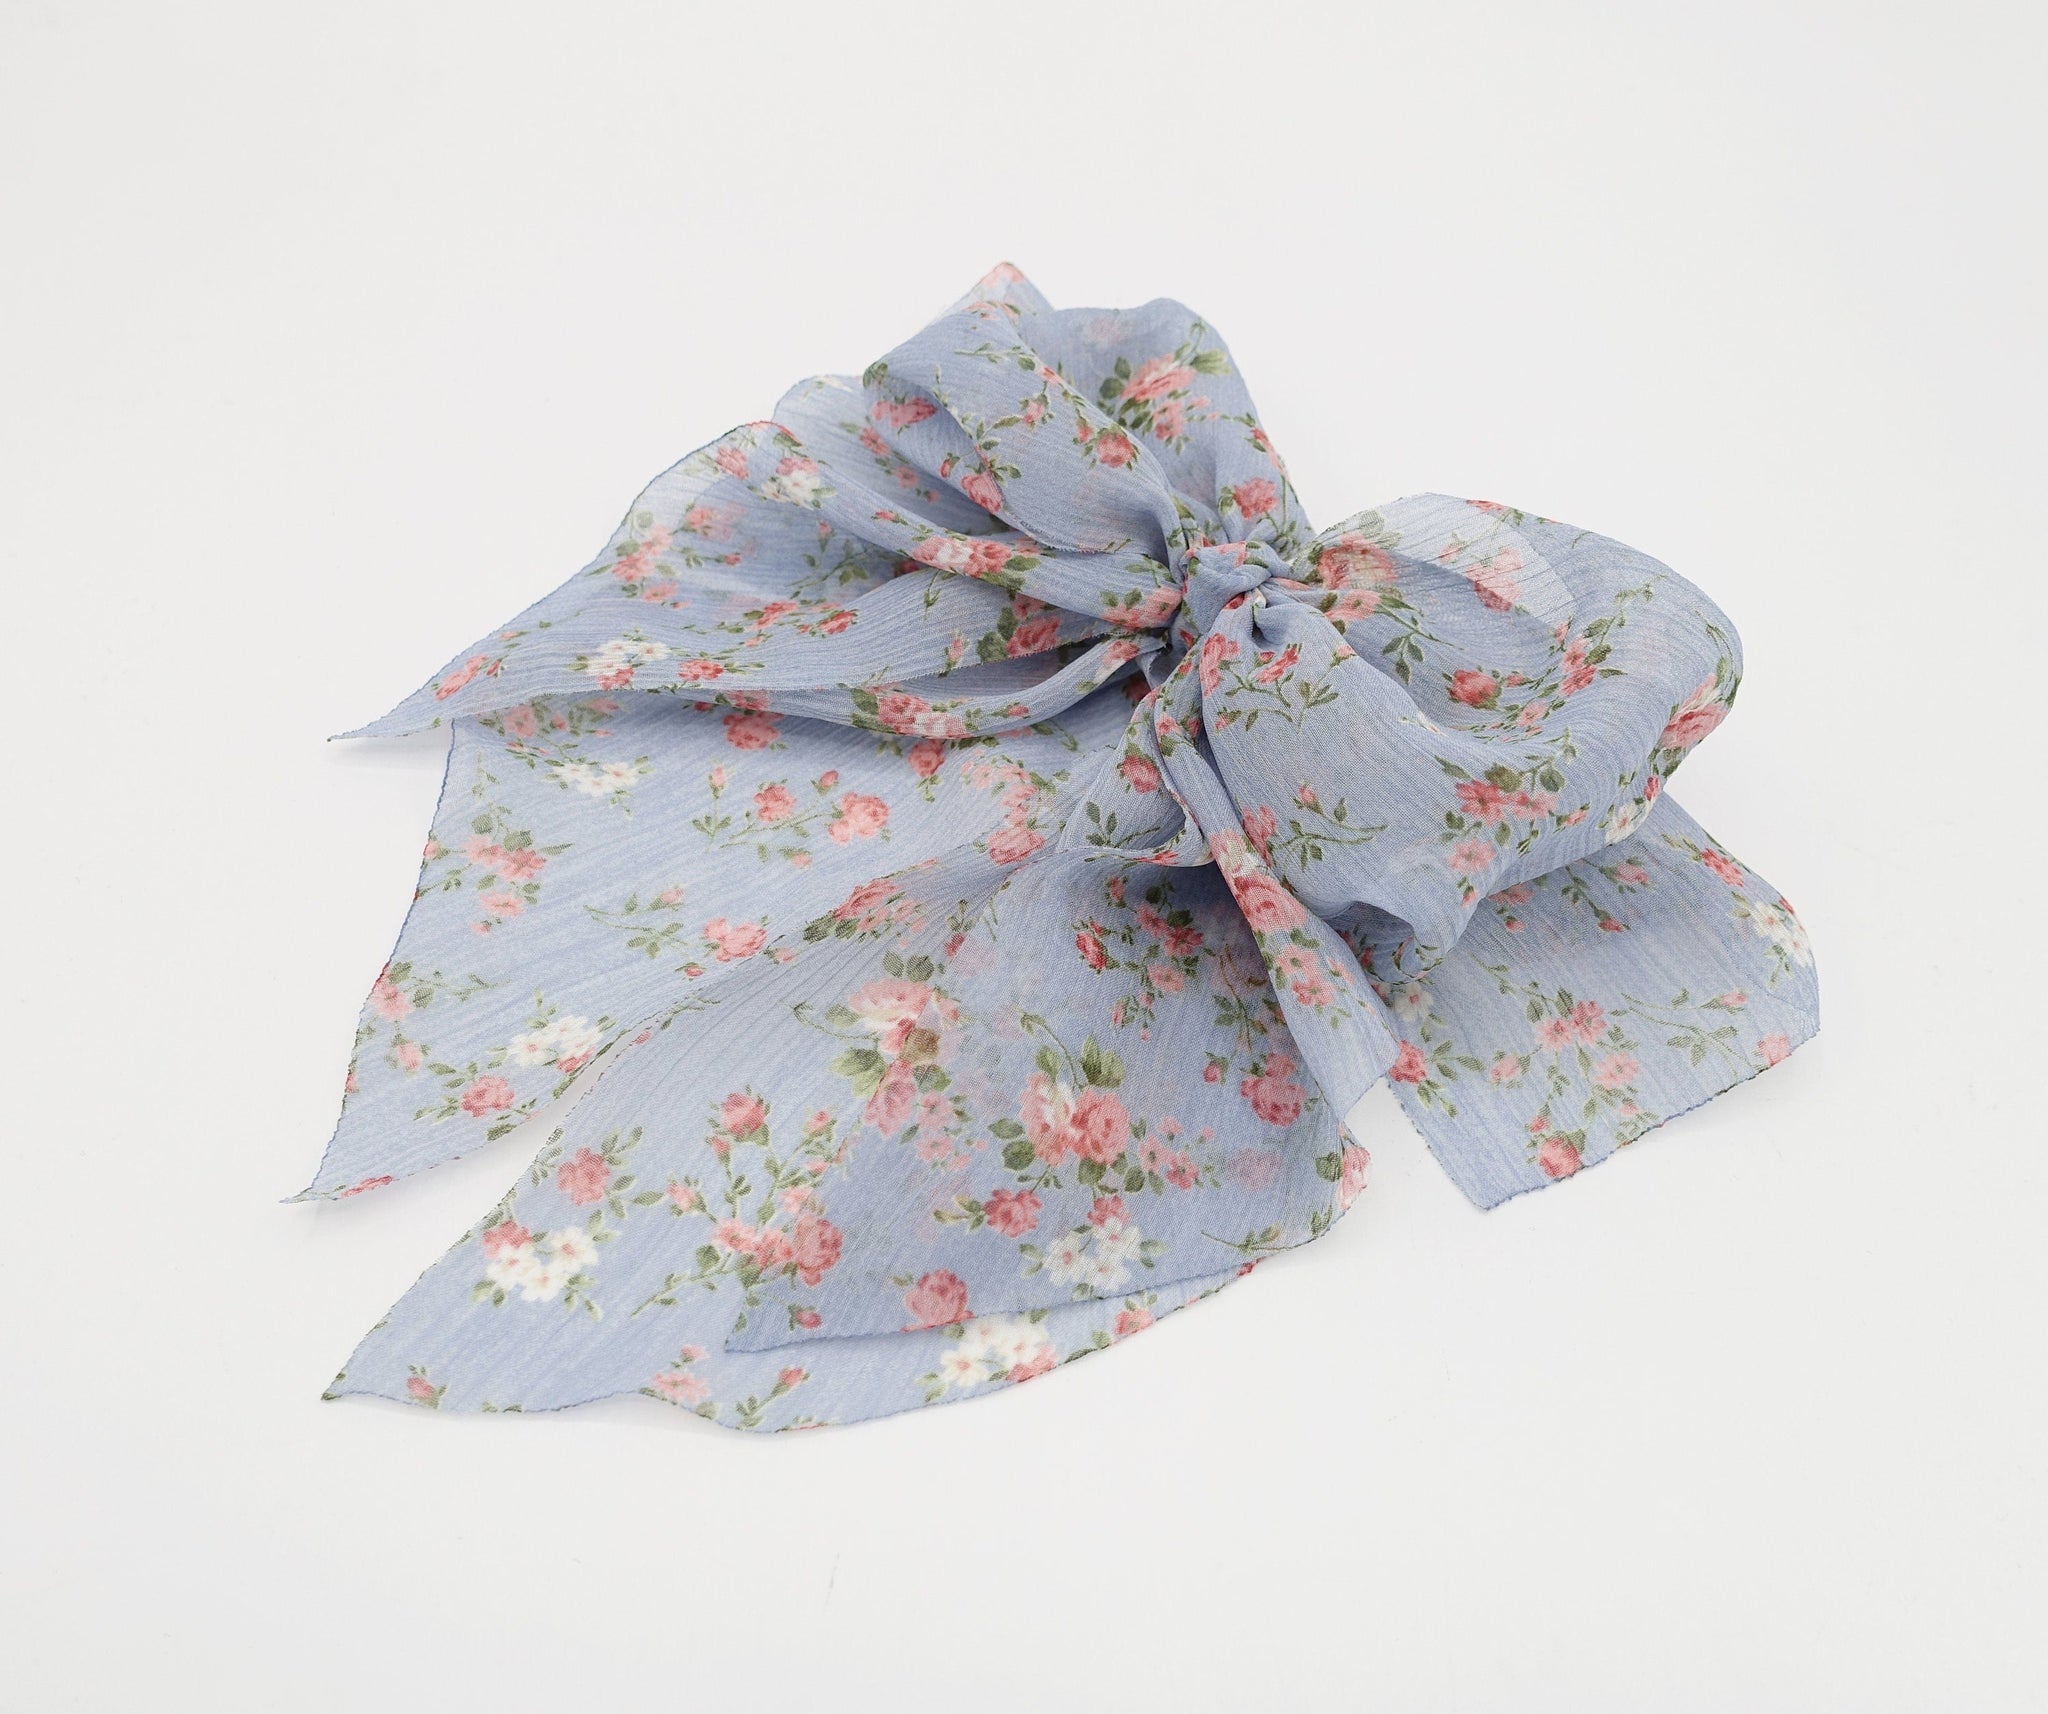 veryshine.com crinkled chiffon floral hair bow for women